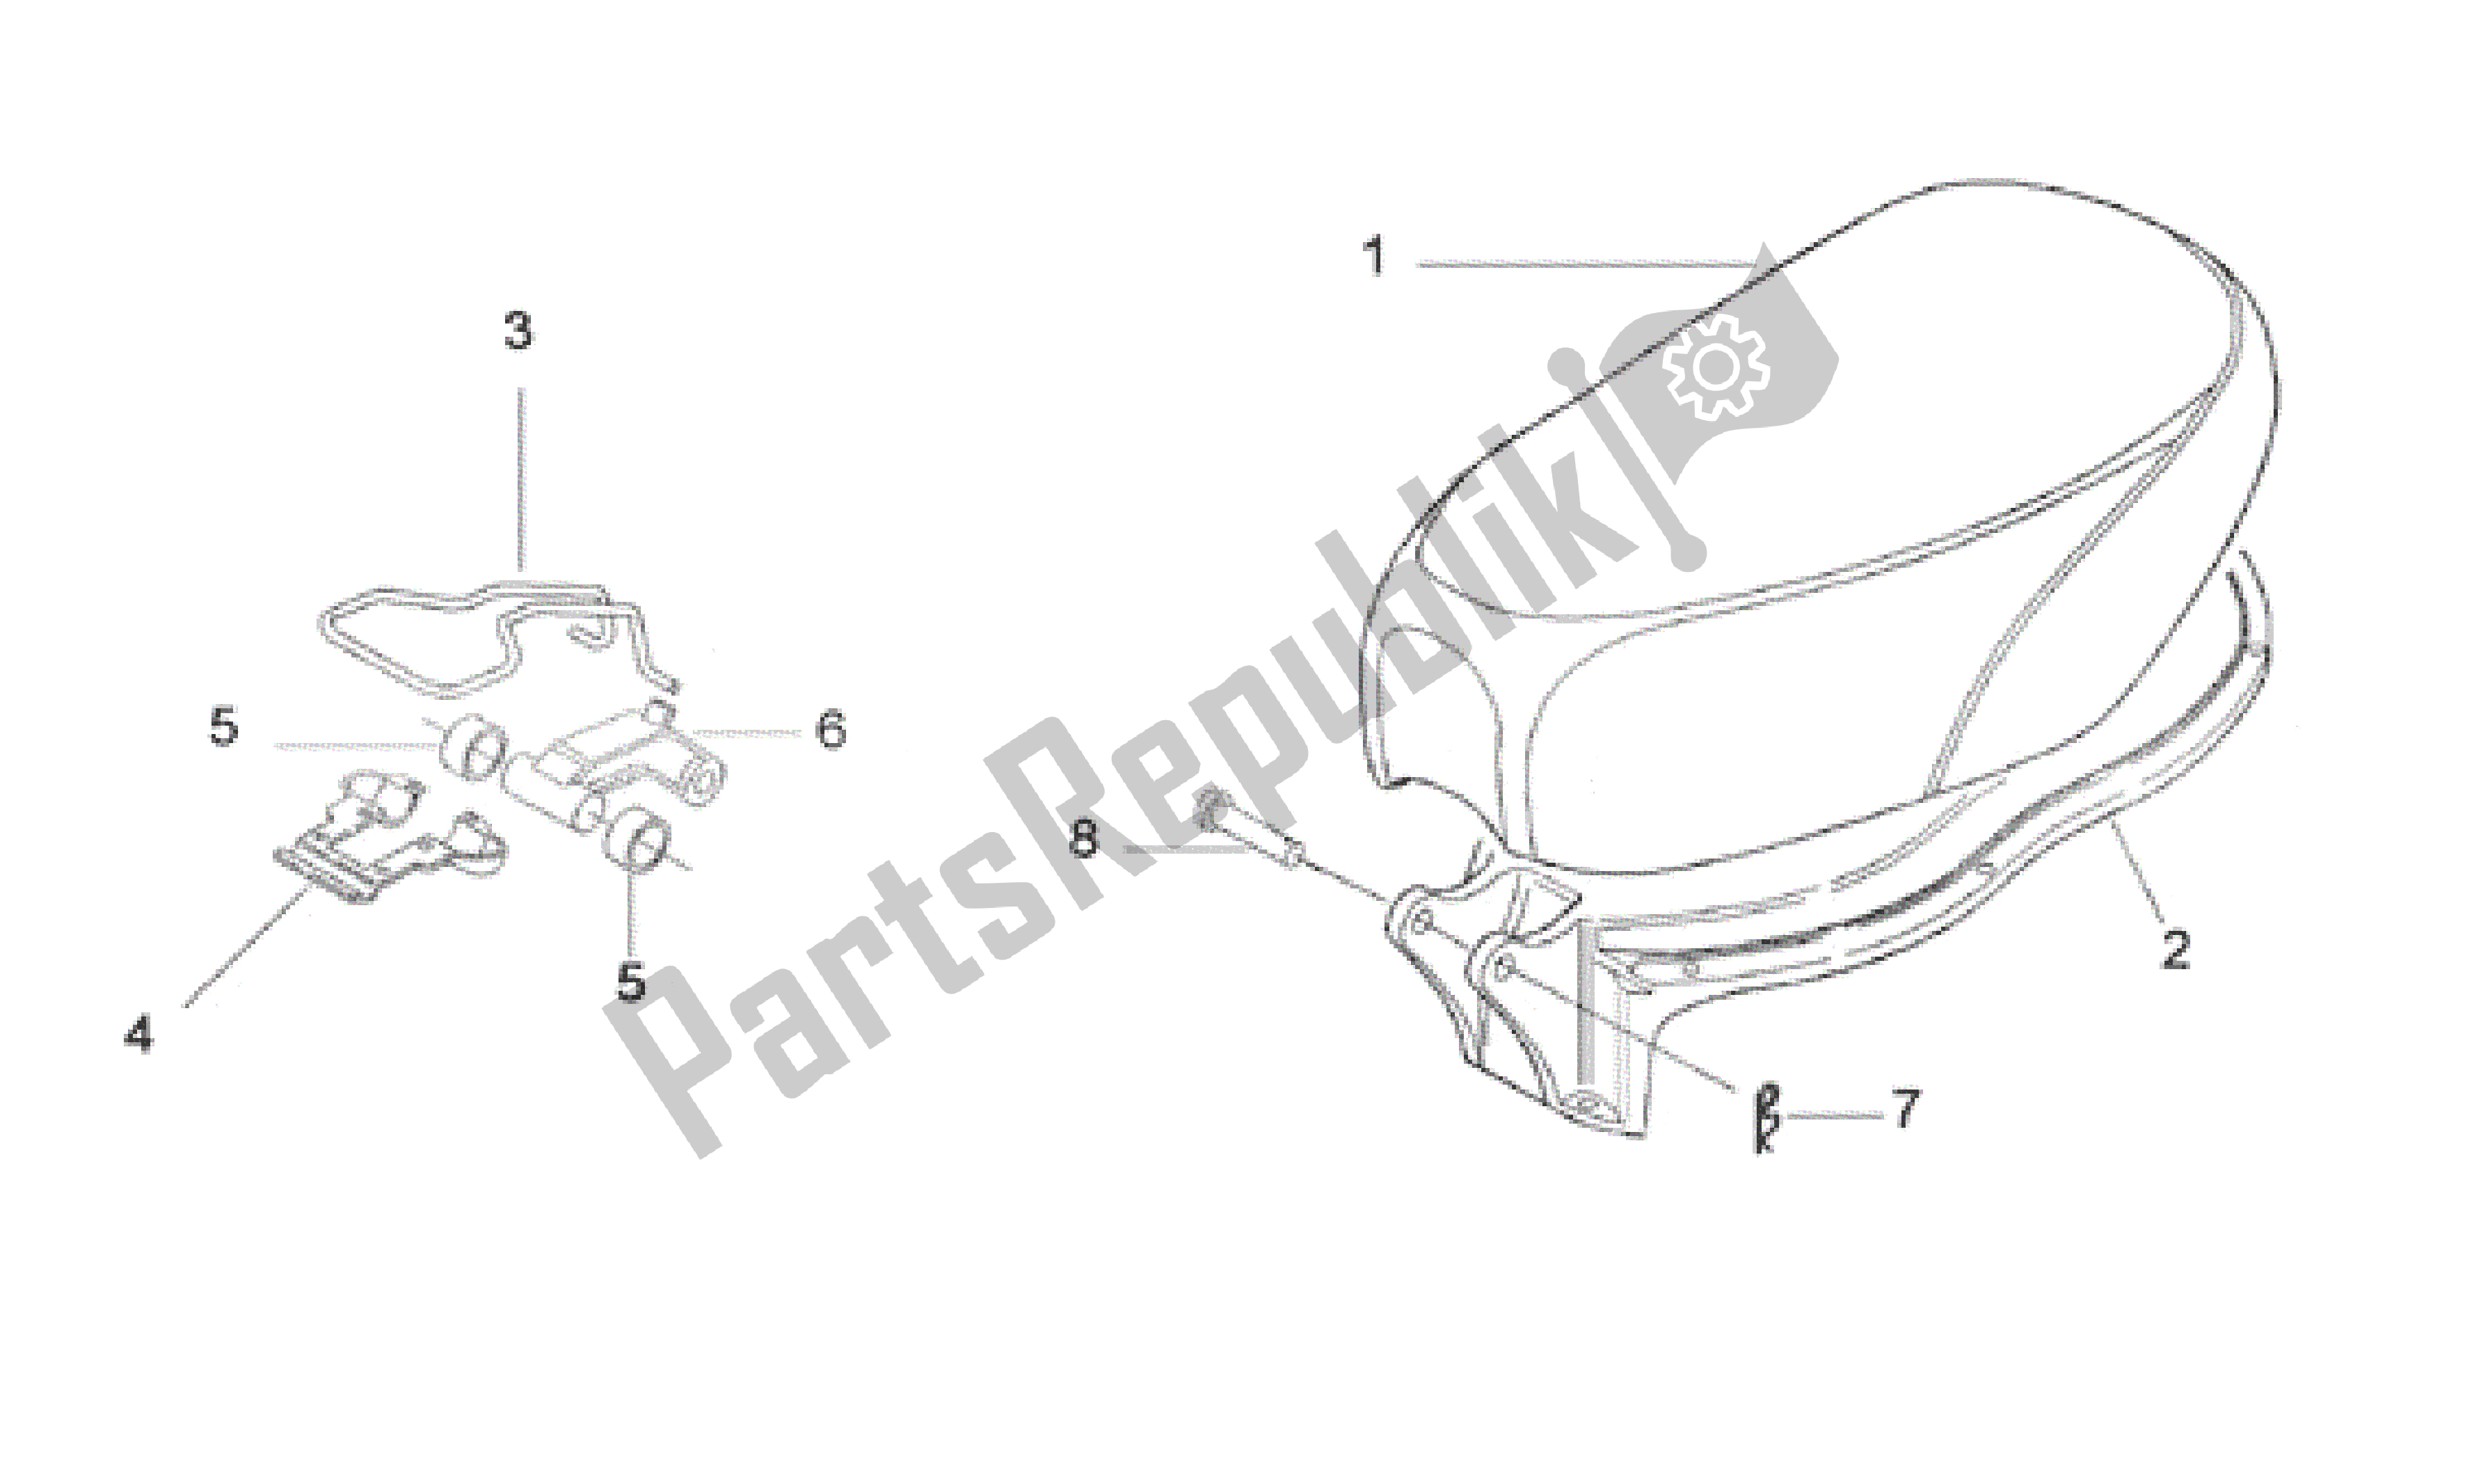 All parts for the Saddle of the Aprilia Scarabeo 50 1993 - 1997